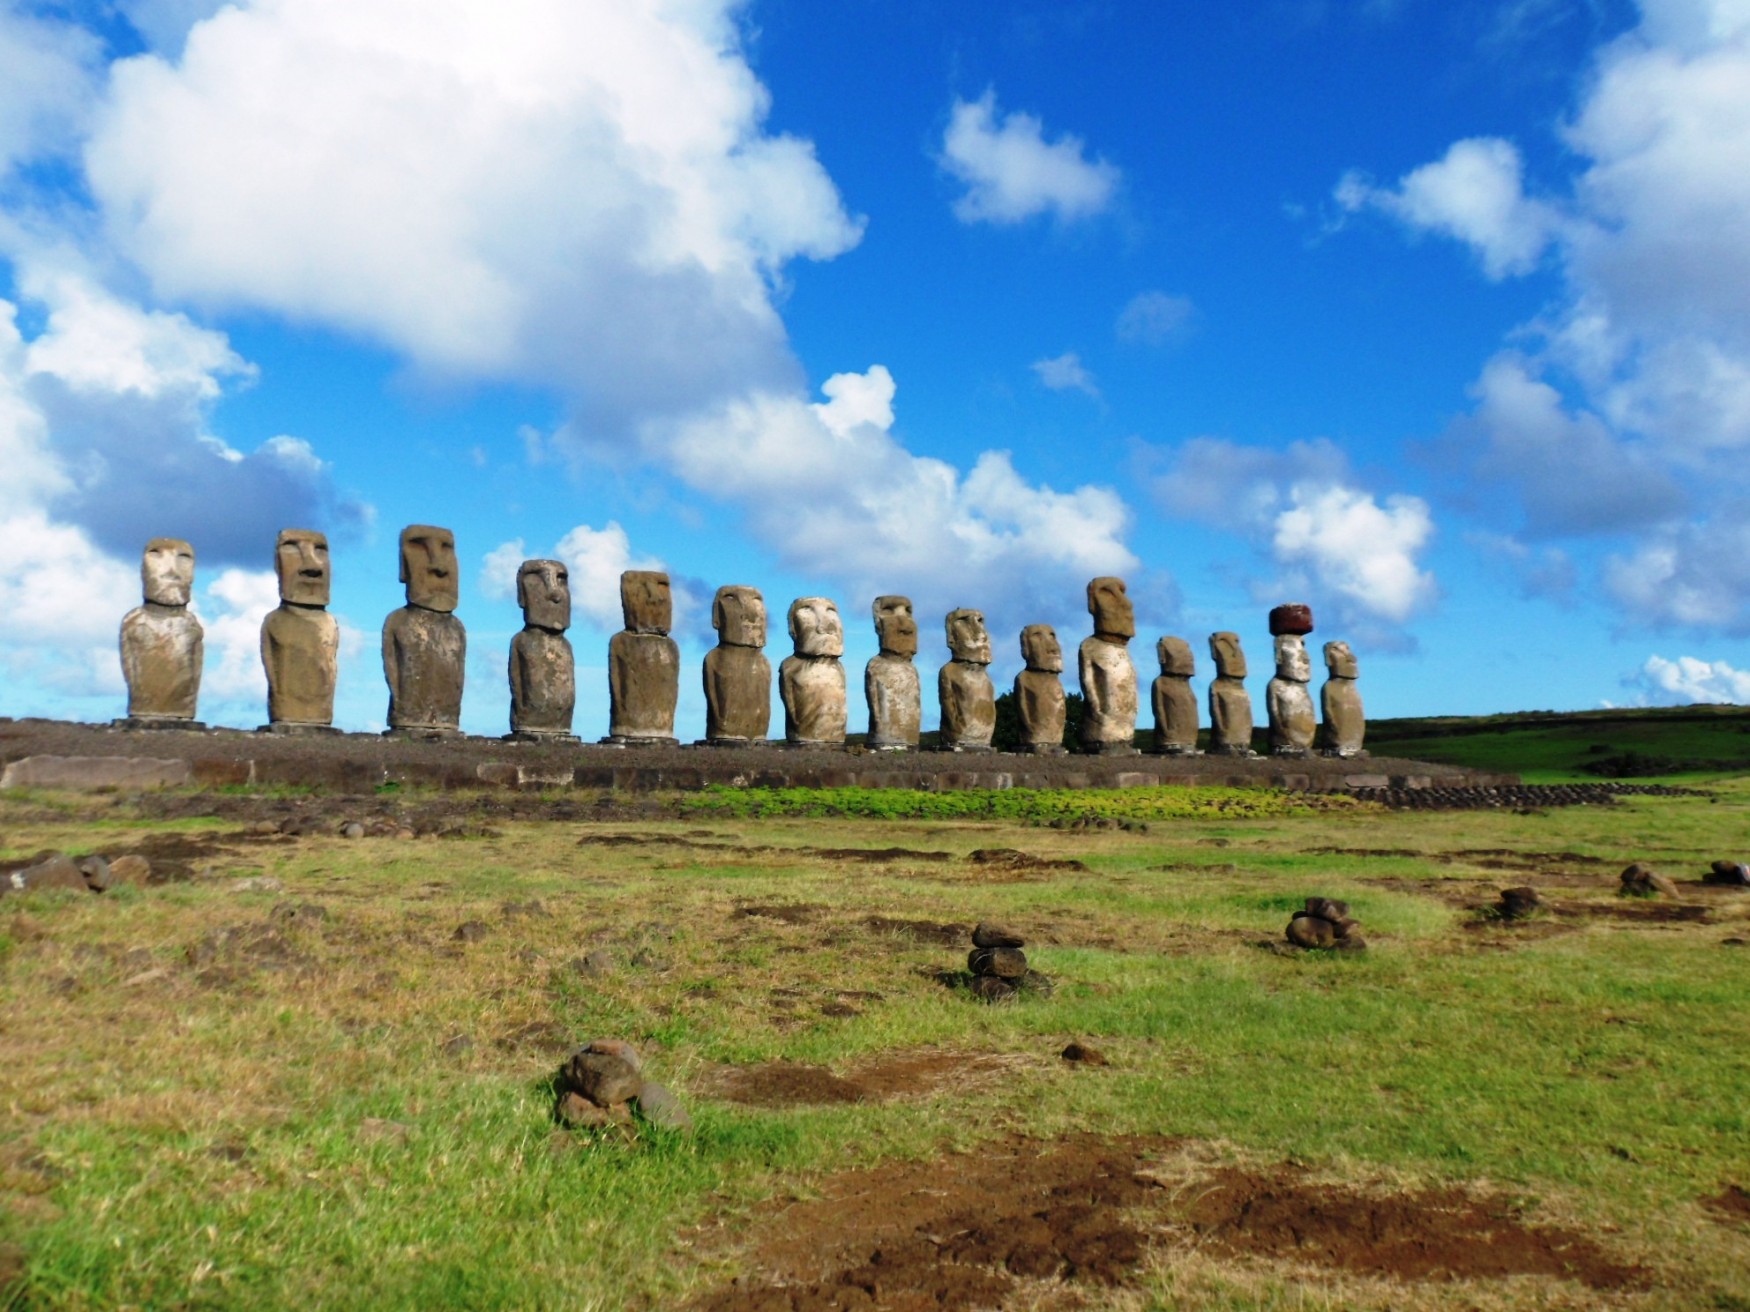 a row of stone statues in a grassy field with Easter Island in the background